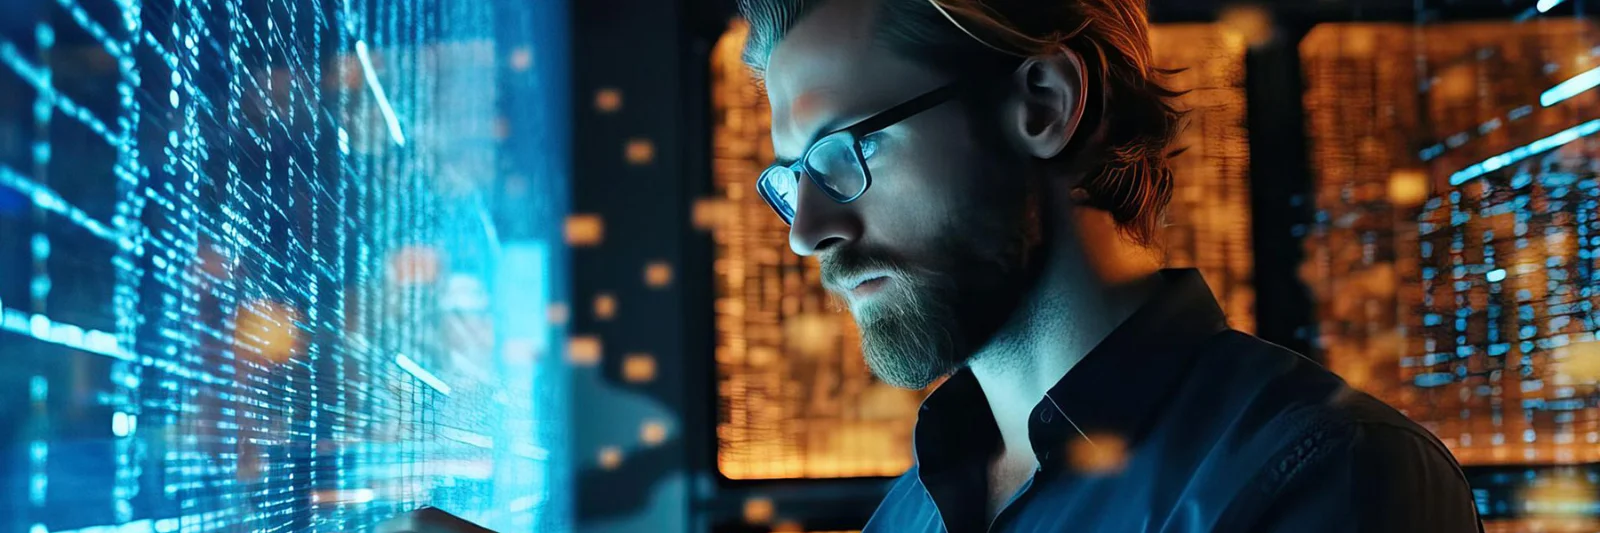 The image features a bearded man wearing glasses, engrossed in interacting with a large, glowing digital interface. The environment is rich with data streams and digital elements, suggesting a high-tech, futuristic setting. The background displays a mixture of blue and orange hues, representing the dynamic and analytical nature of asset management. This visual emphasizes the integration of advanced technology and data analytics in modern asset management, showcasing a professional deeply engaged in optimizing financial assets through innovative digital tools.